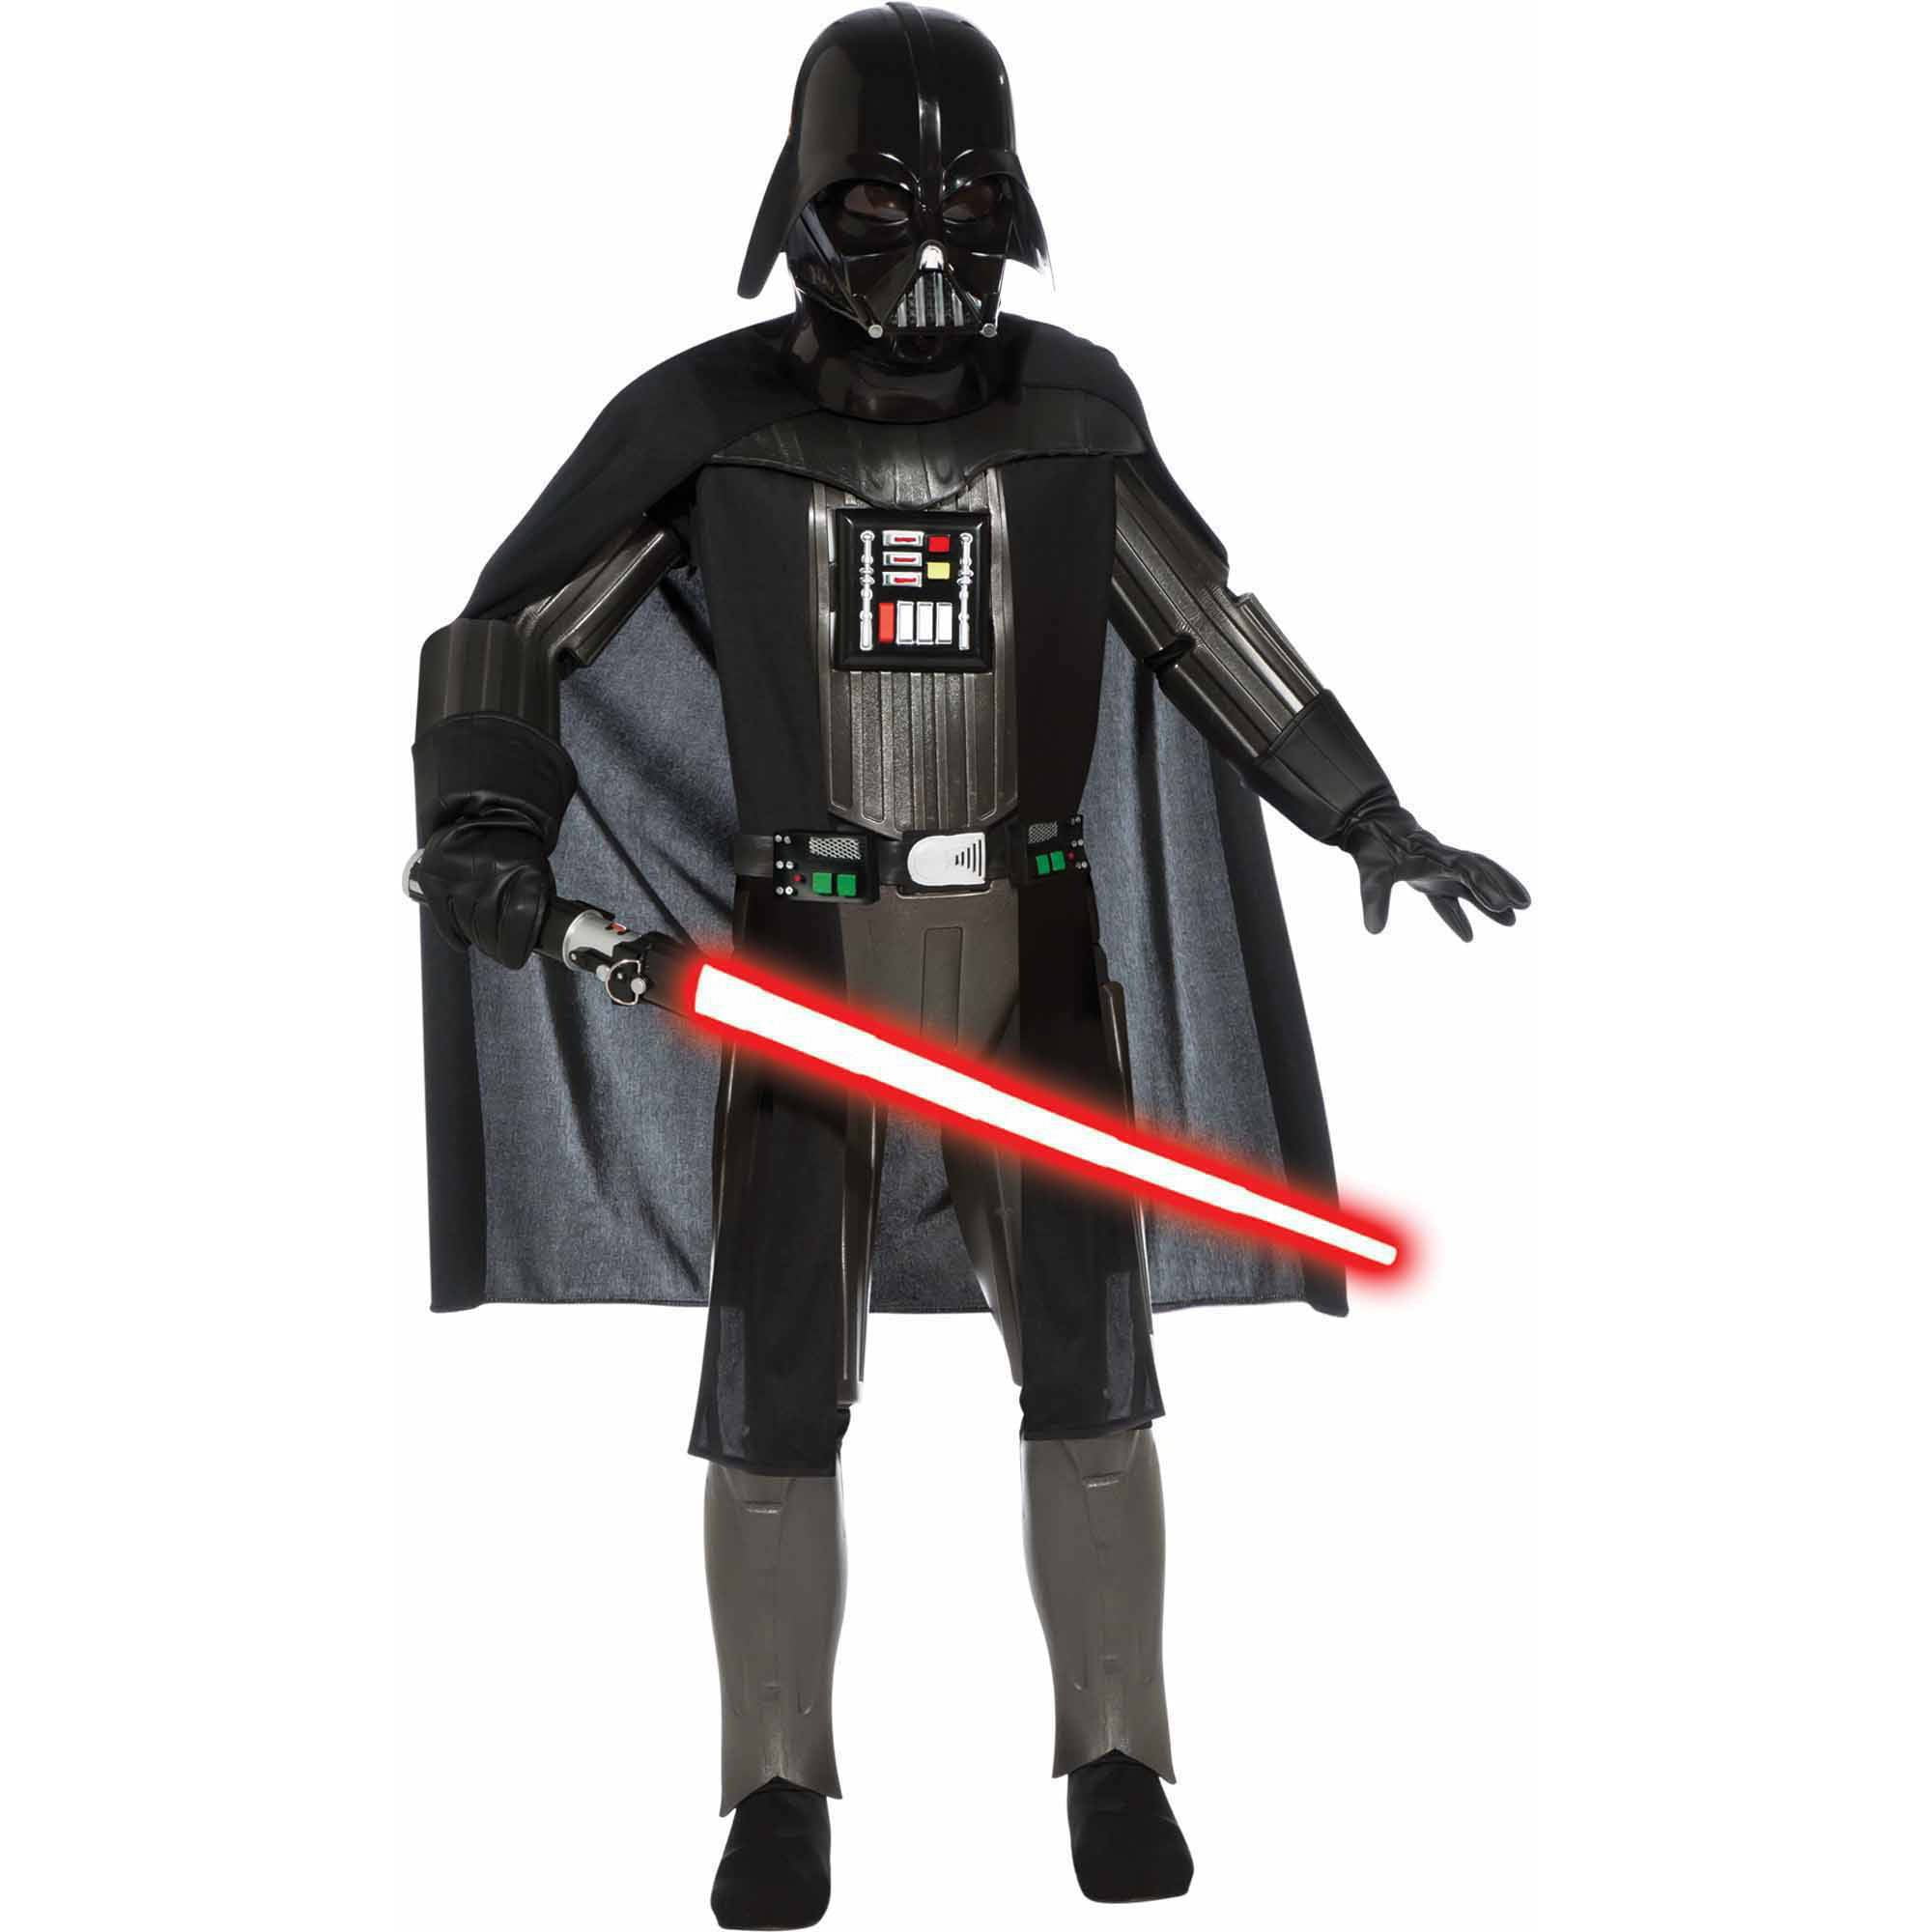 Boys Super Deluxe Darth Vader Costume Star Wars Villain Fancy Dress Child Outfit 